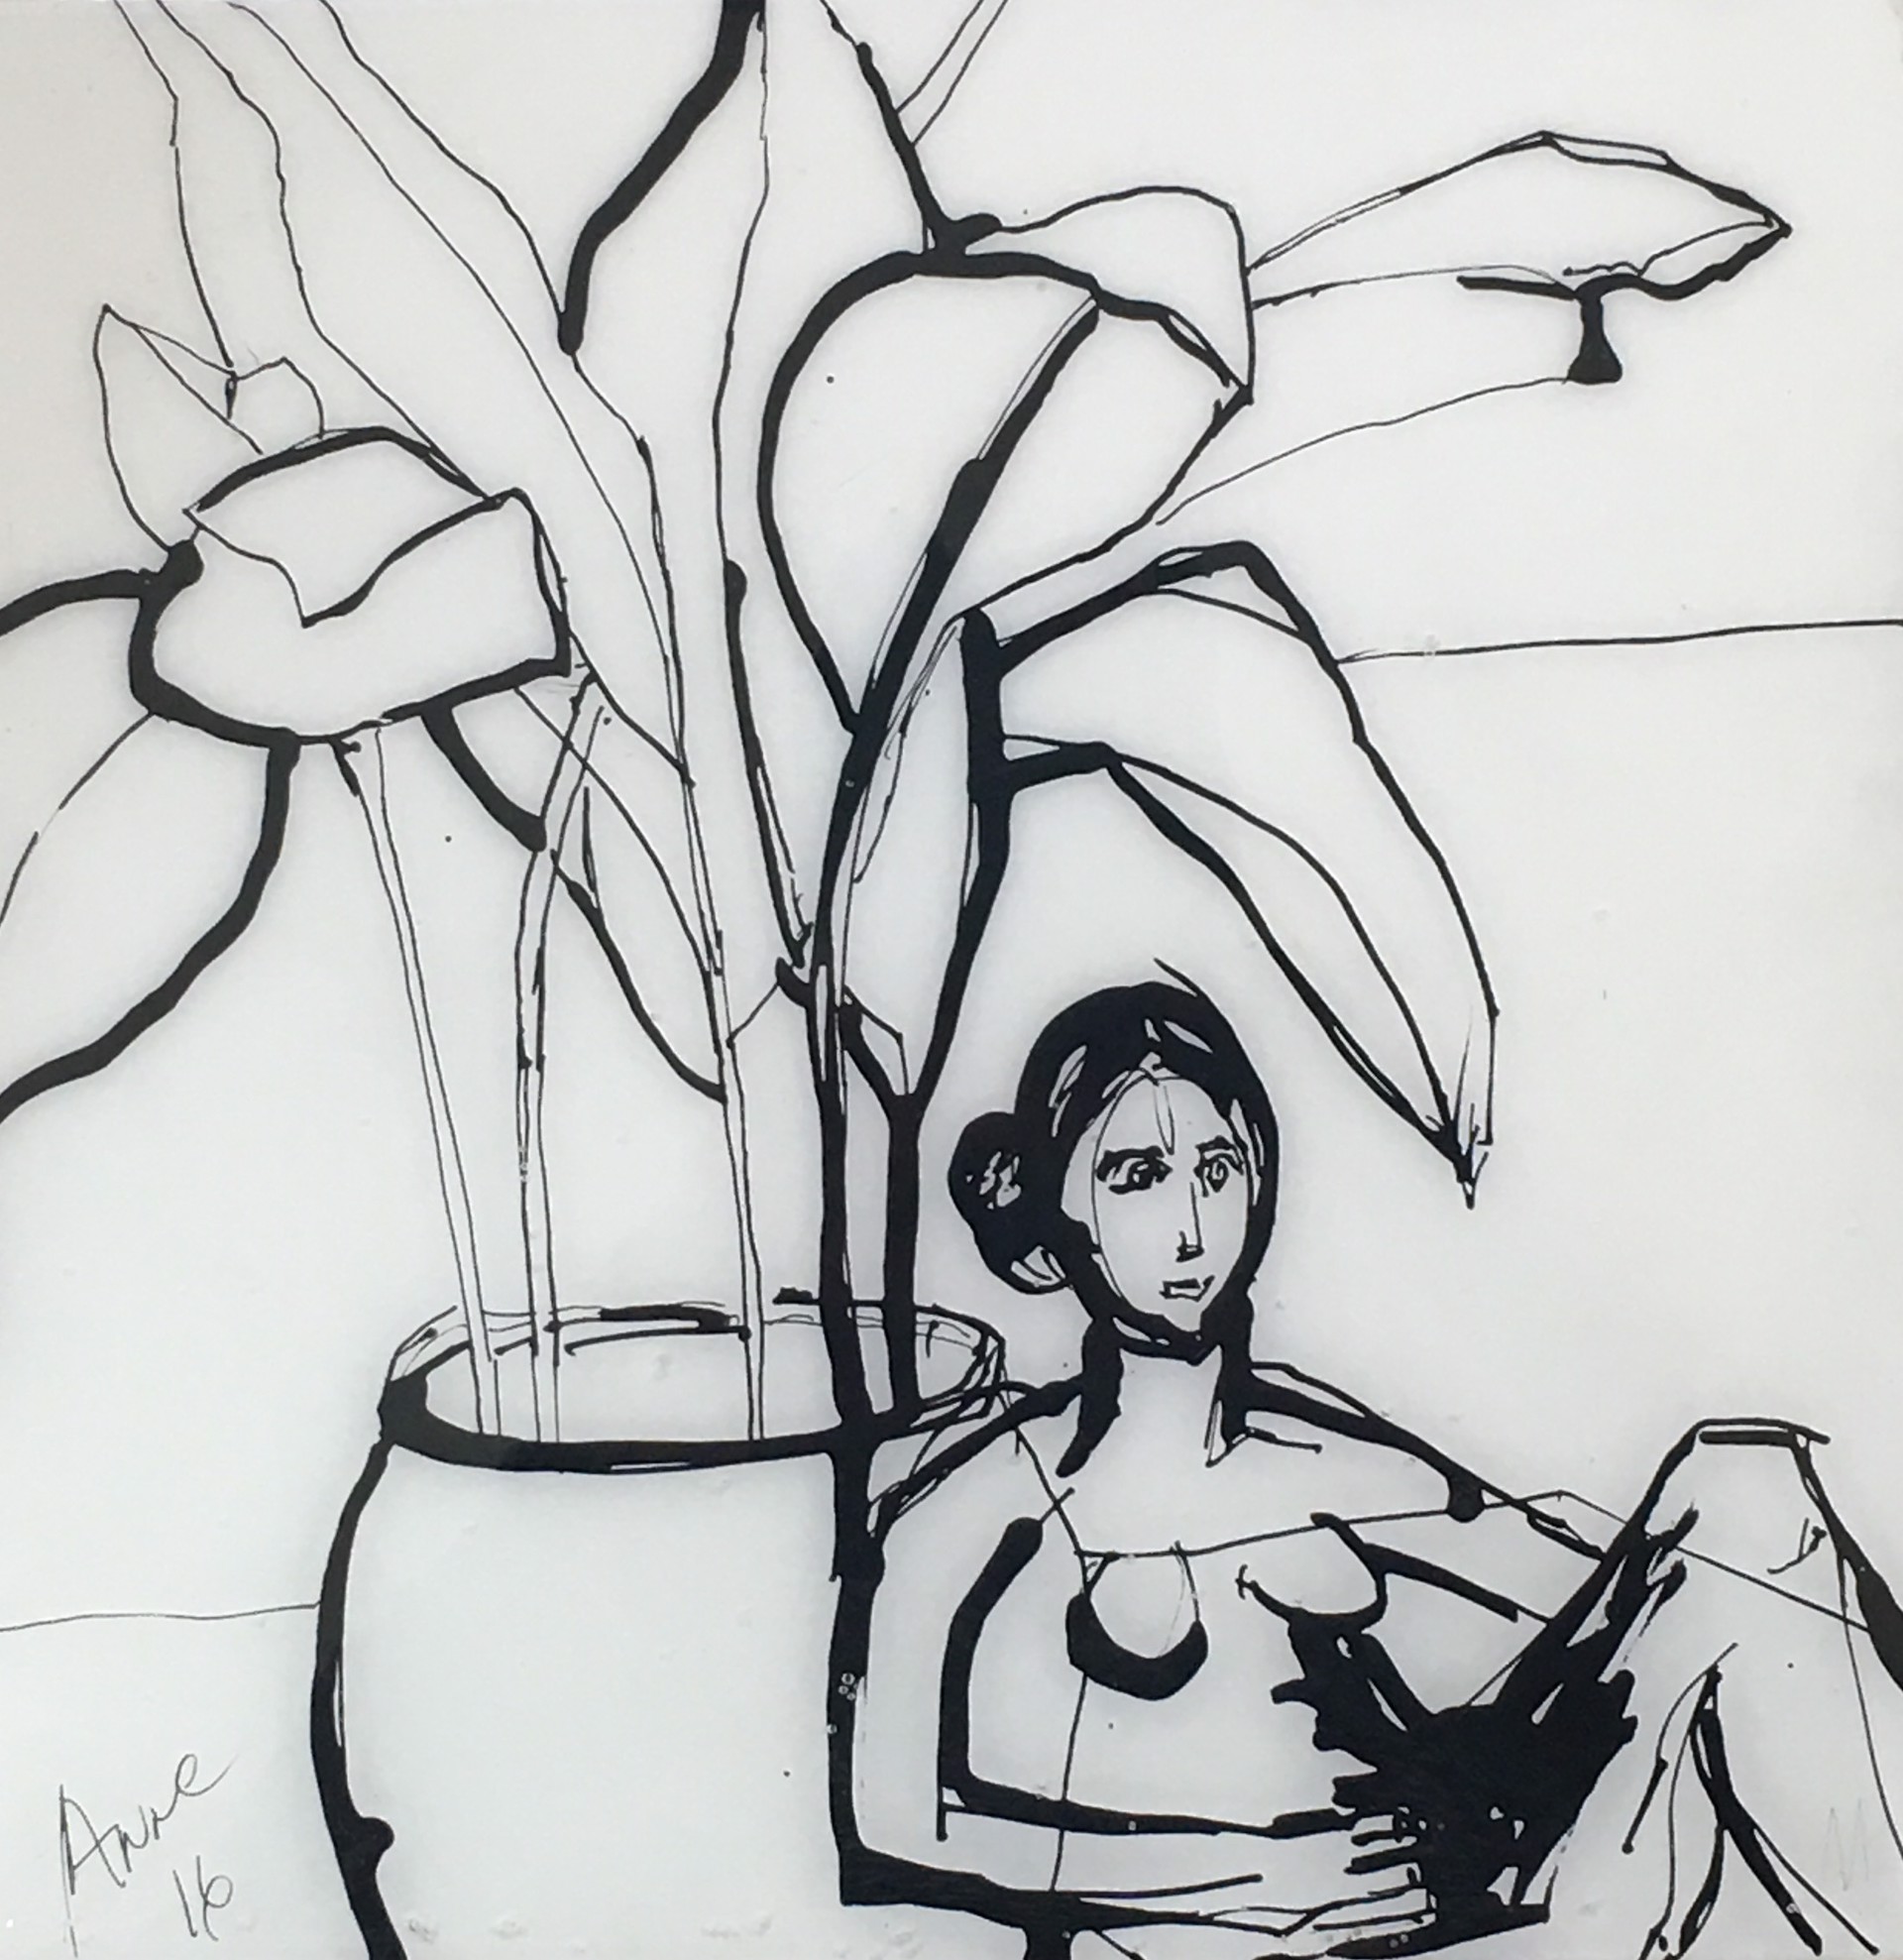 Sitting Under the Banana Tree by Anne Darby Parker